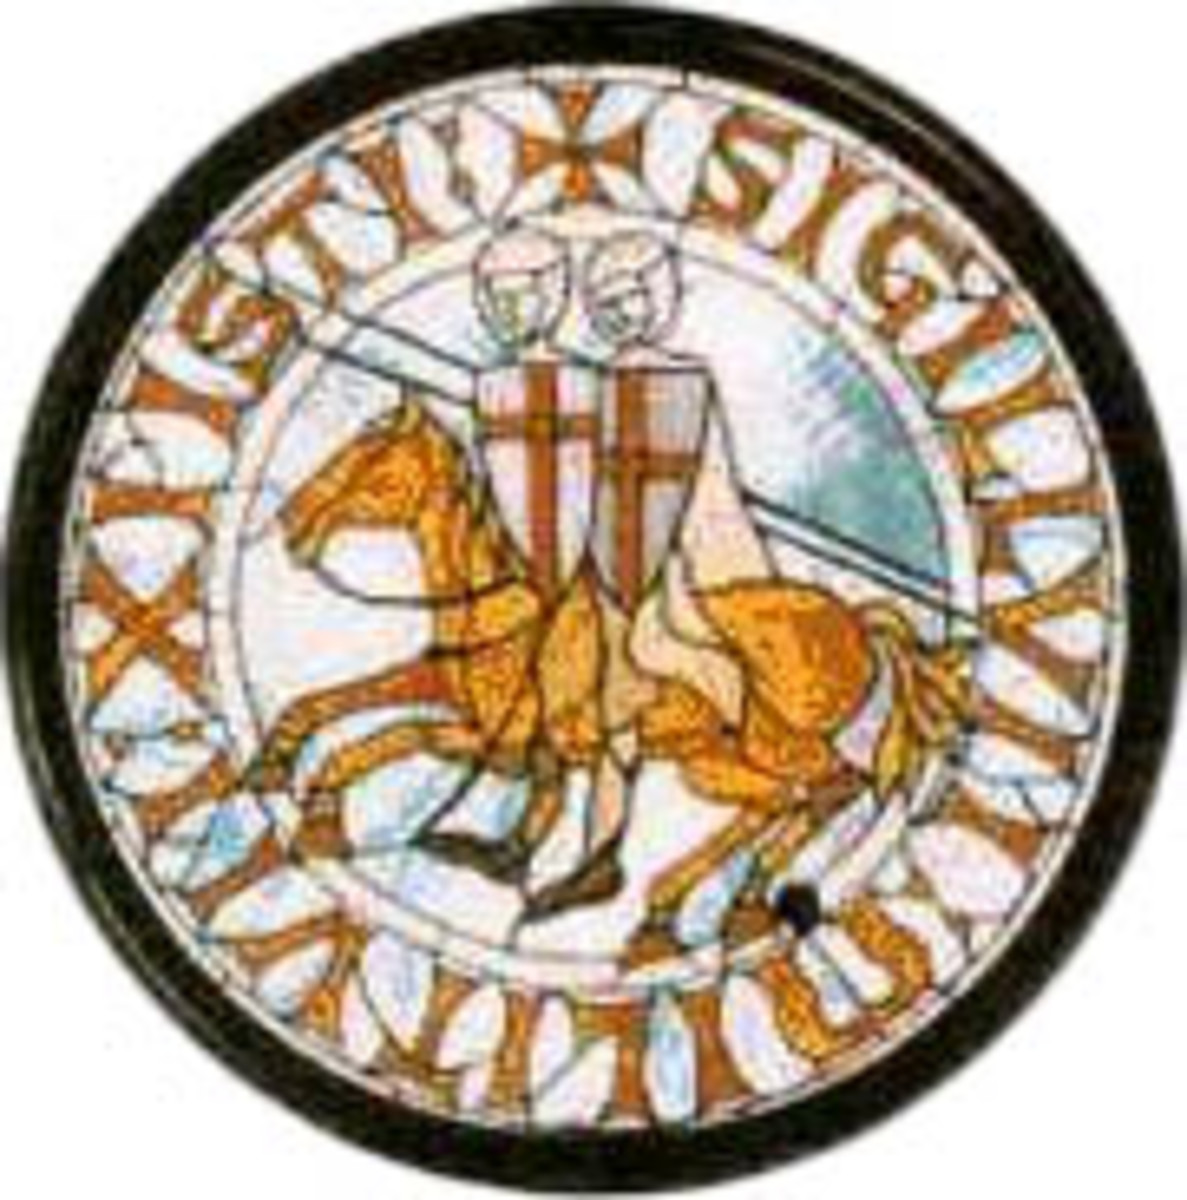 The seal of the Knights Templar, showing two knights on one horse, intended as an image of monastic humility. 